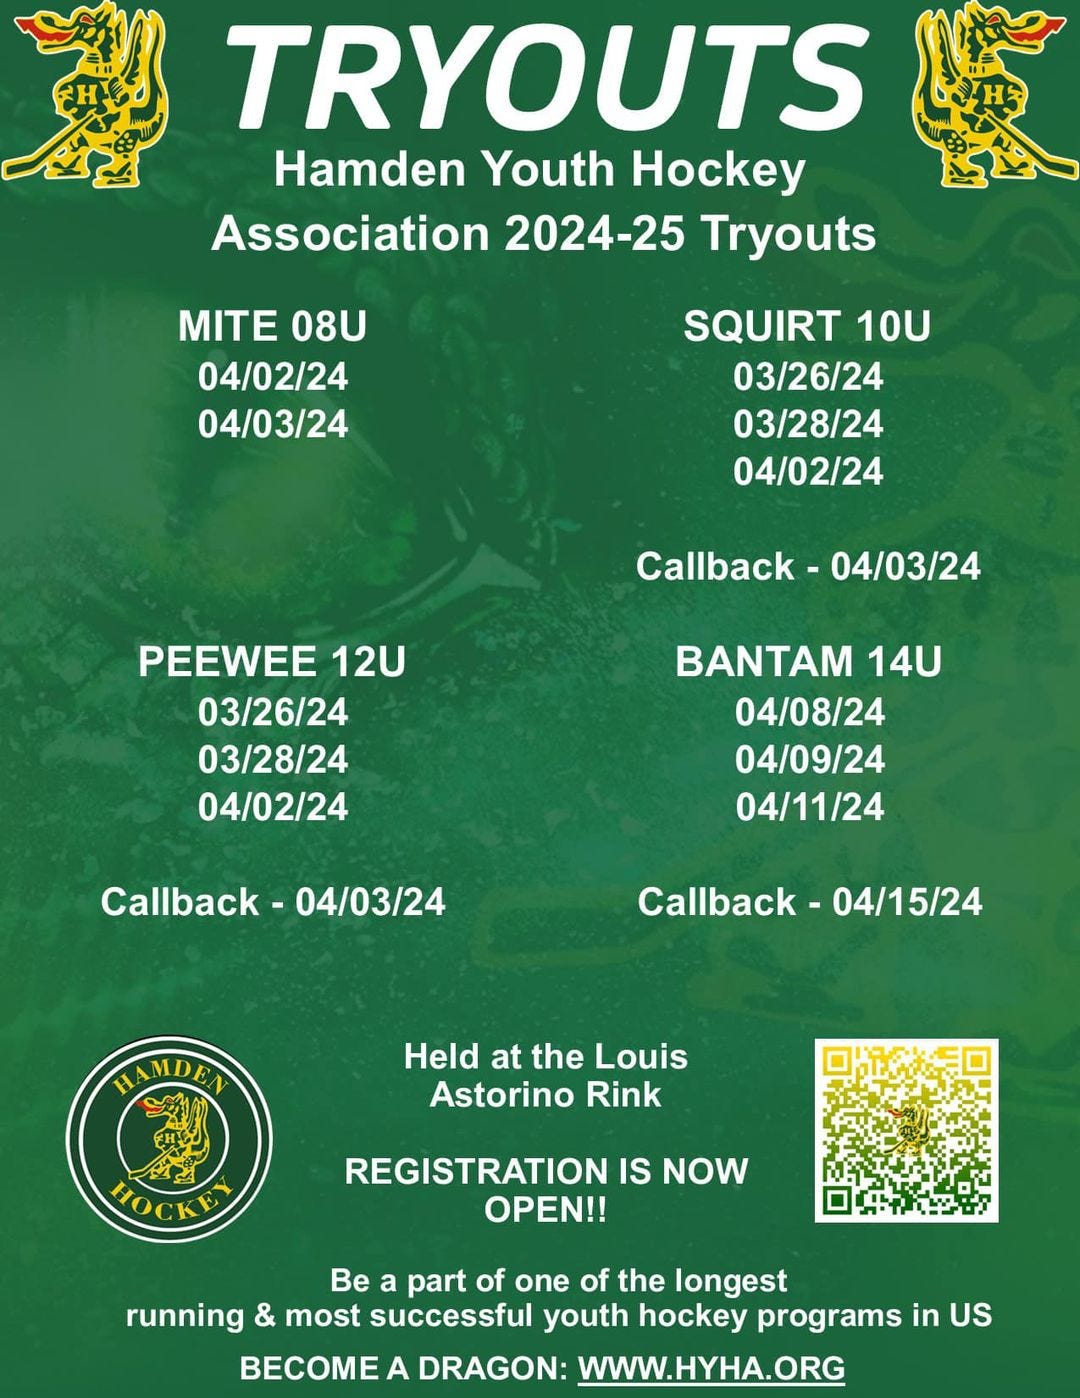 May be an image of basketball and text that says 'TRYOUTS Hamden Youth Hockey Association 2024-25 Tryouts MITE 08U 04/02/24 04/03/24 SQUIRT 10U 03/26/24 03/28/24 04/02/24 Callback 04/03/24 PEEWEE 12U 03/26/24 03/28/24 04/02/24 BANTAM 14U 04/08/24 04/09/24 04/11/24 Callback 04/03/24 Callback 04/15/24 HAMDEN Held at the Louis Astorino Rink HOCKE REGISTRATION IS NOW OPEN!! Be part of one of the longest running & most successful youth hockey programs in US BECOME A DRAGON: WWW.HYHA.ORG'